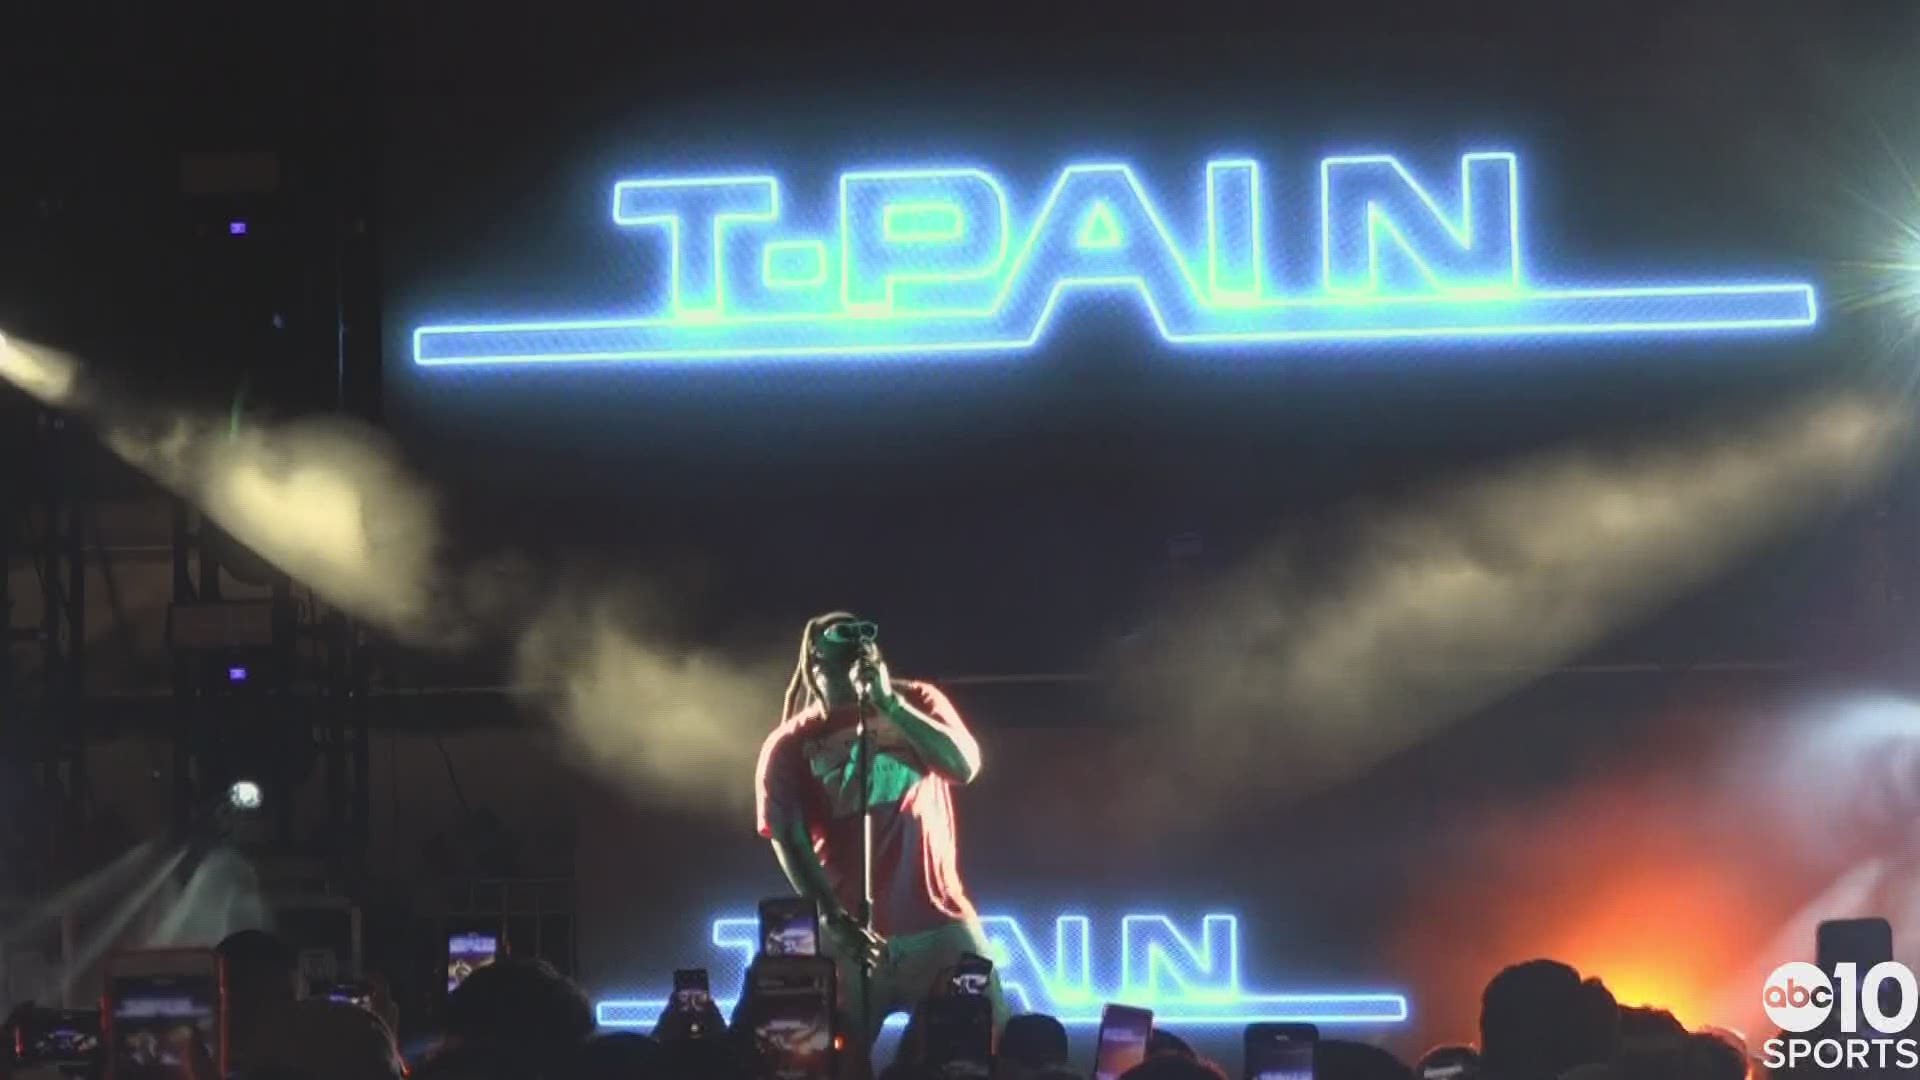 Grammy Award-winning hip-hop artist T-Pain brought the party to the Downtown Common plaza in Sacramento to close out Day 1 of the California Classic. Here's a snippet from his set including "Booty Wurk" and "Cyclone"